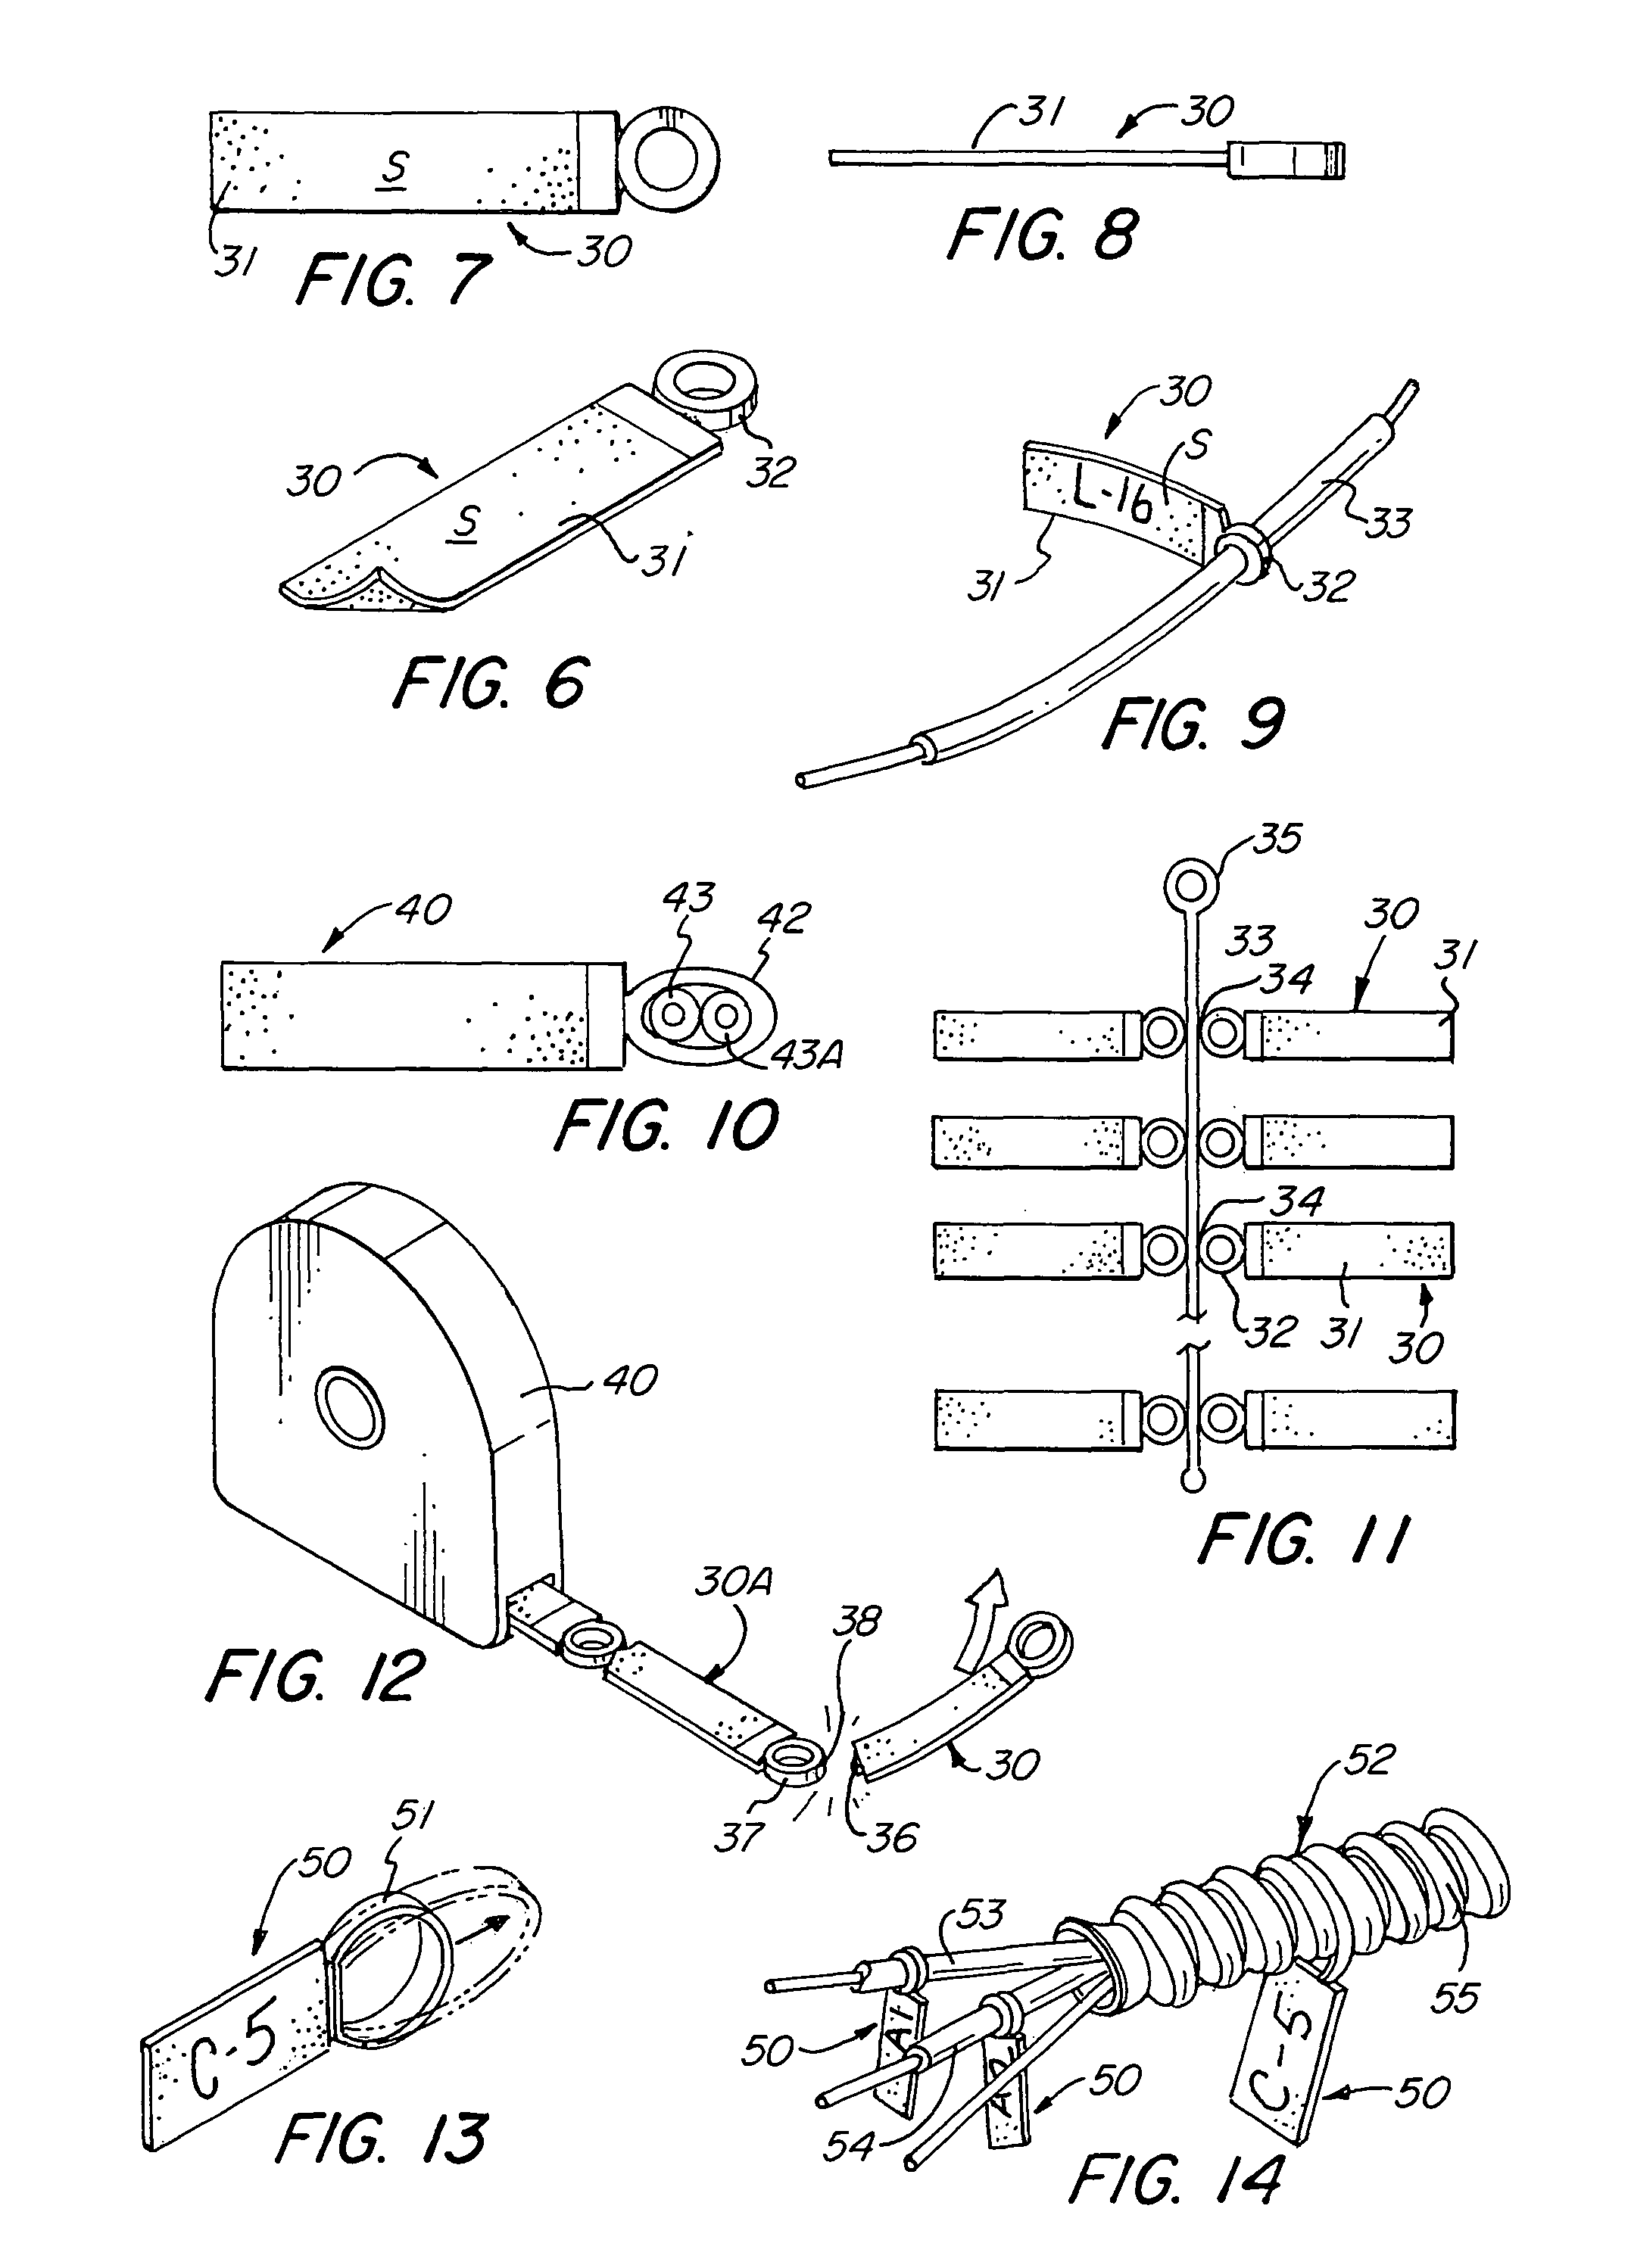 Wire/cable identification device